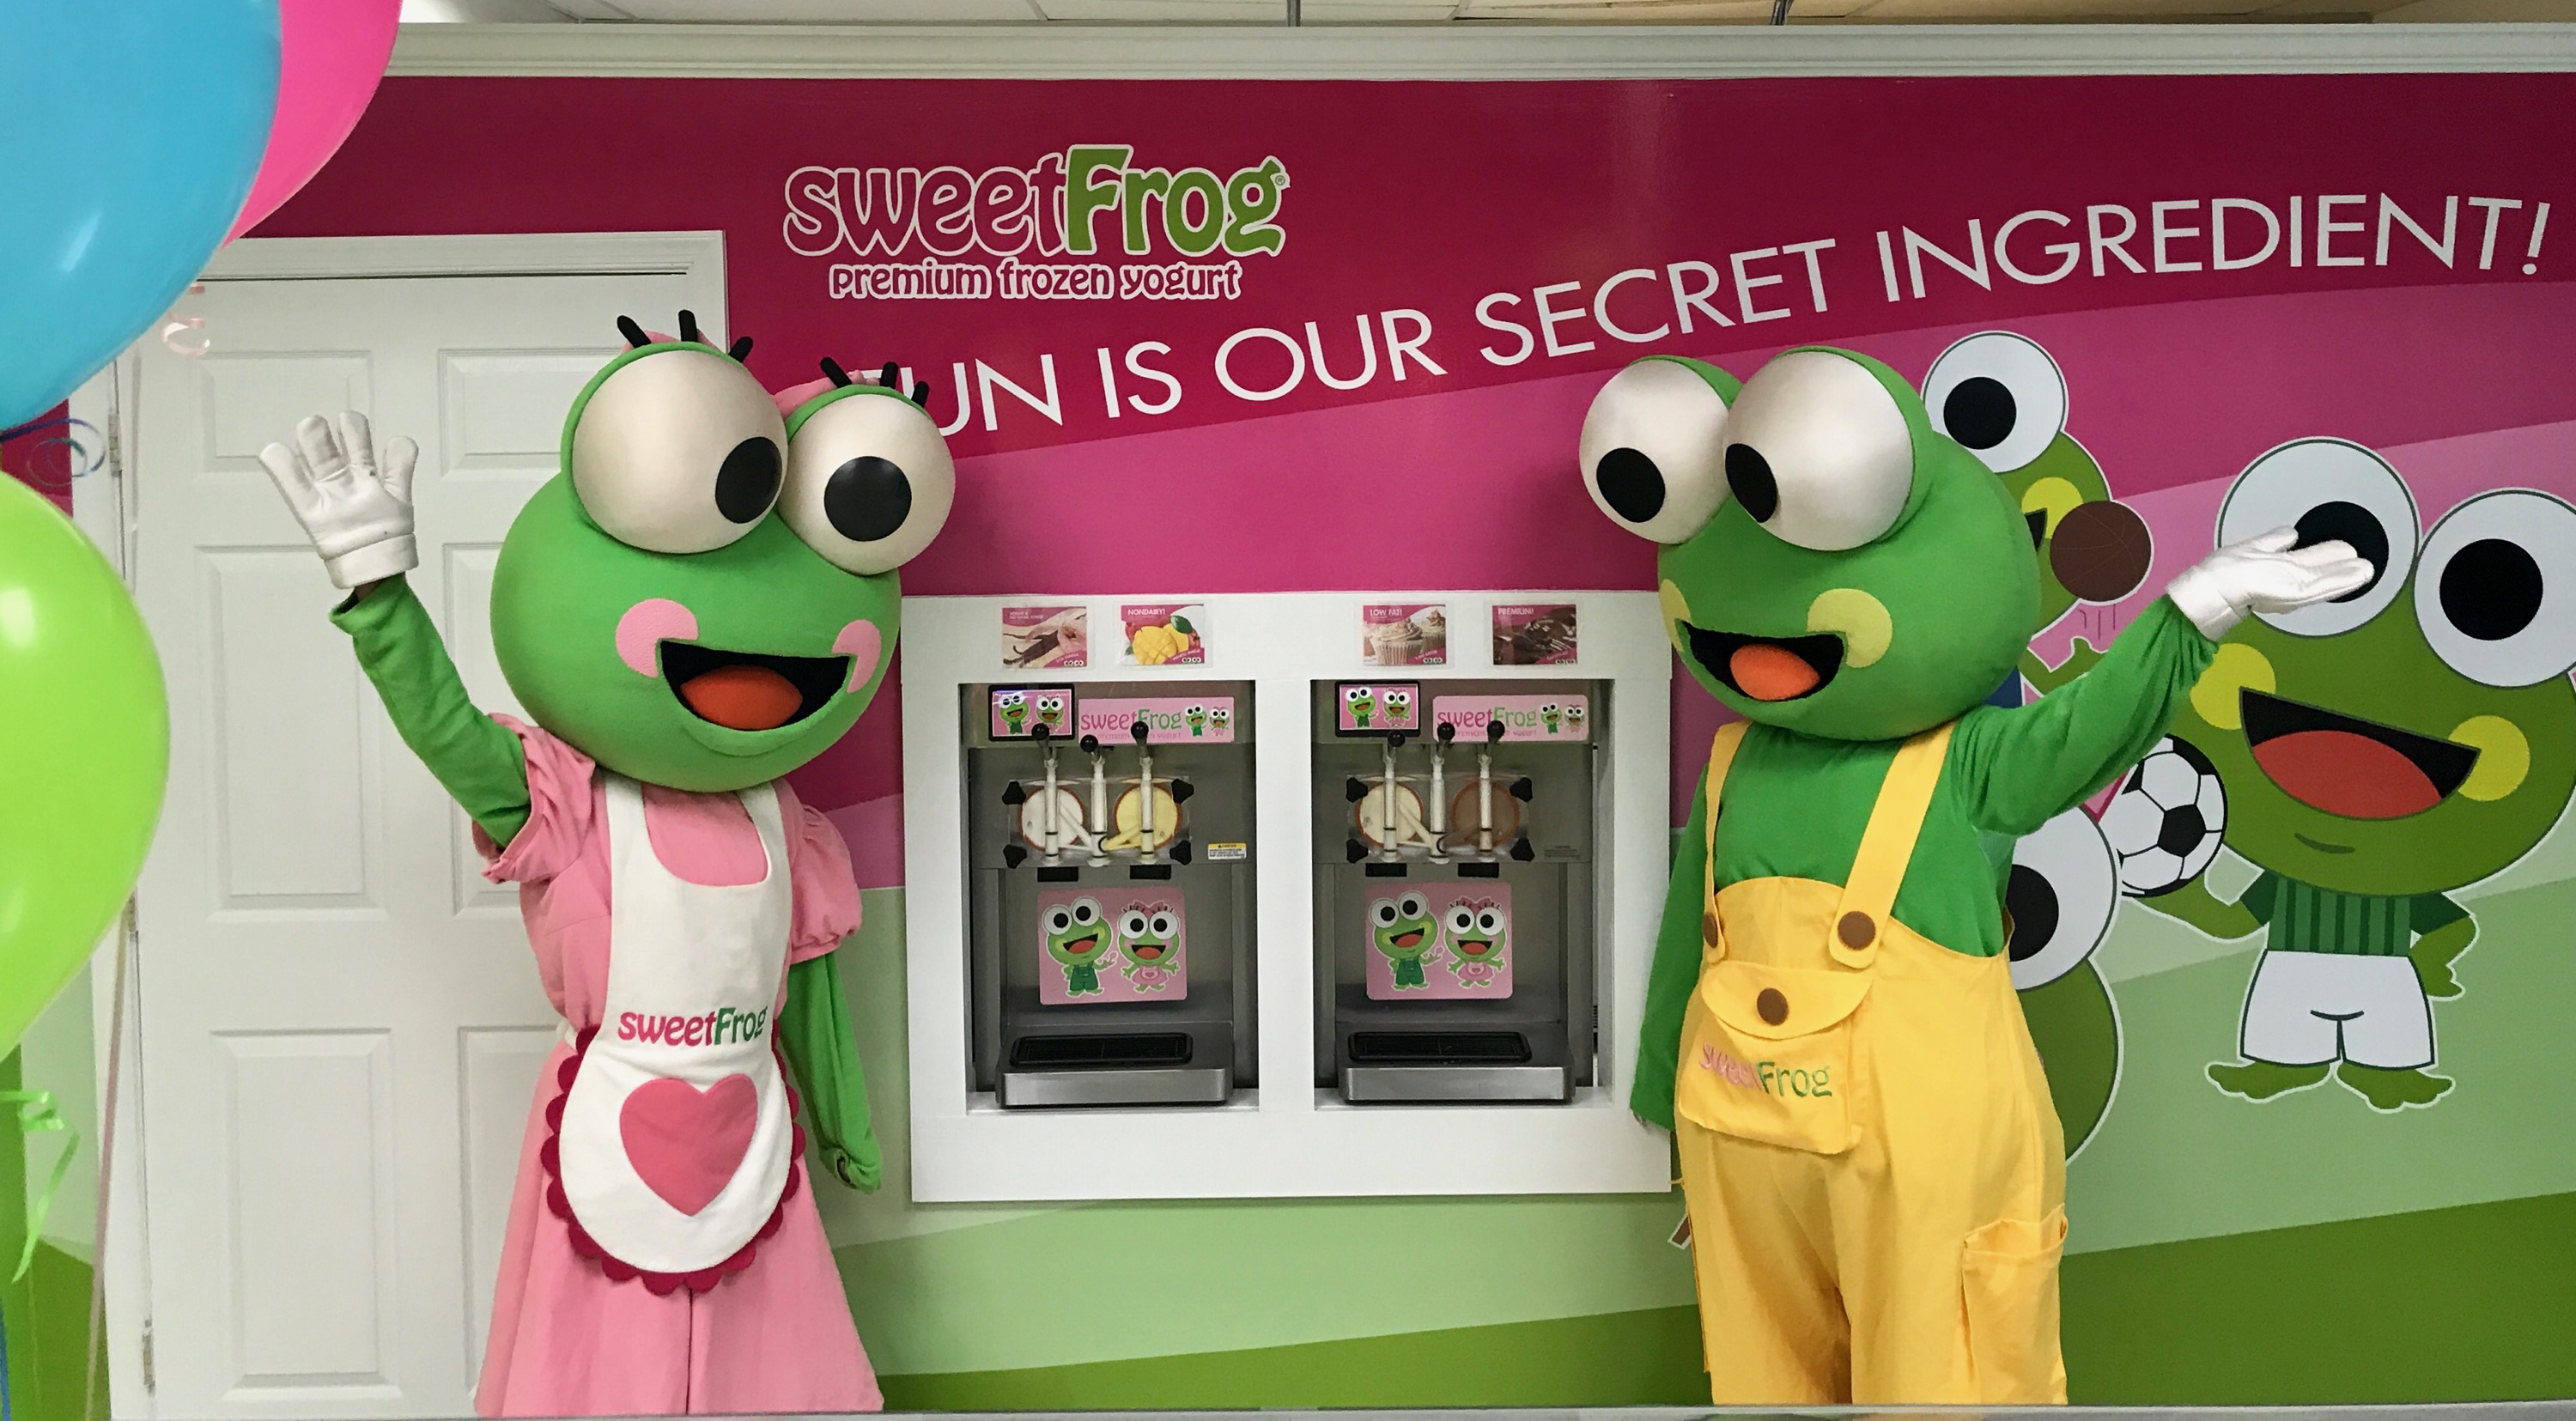 sweetFrog mascots Scoop and Cookie helped opened the Fredericksburg Field House location on June 10.